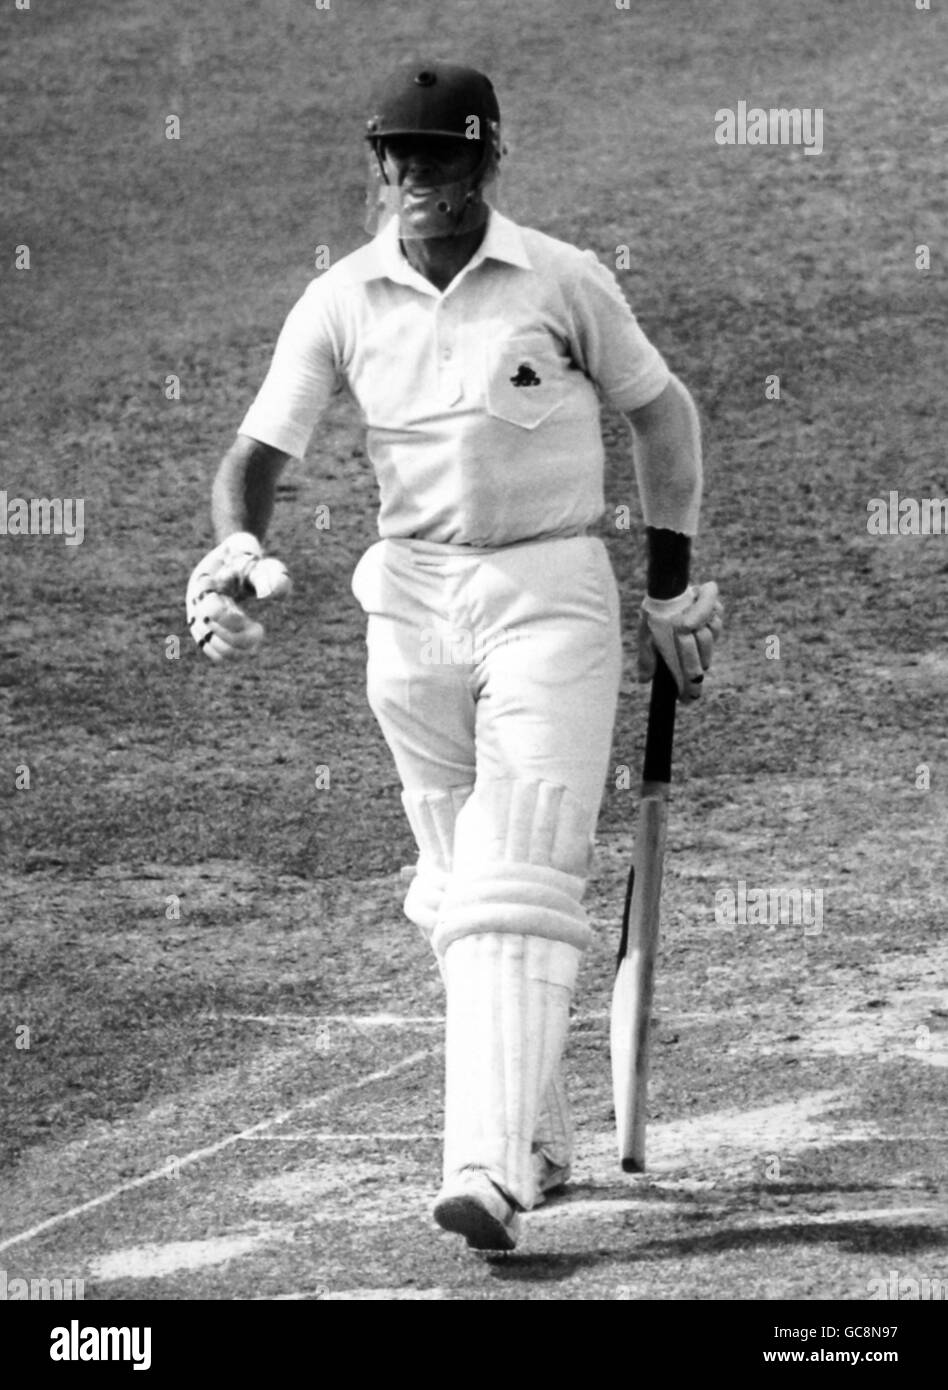 Cricket - Portrait. England and Yorkshire Cricketer Geoff Boycott ready for action Stock Photo